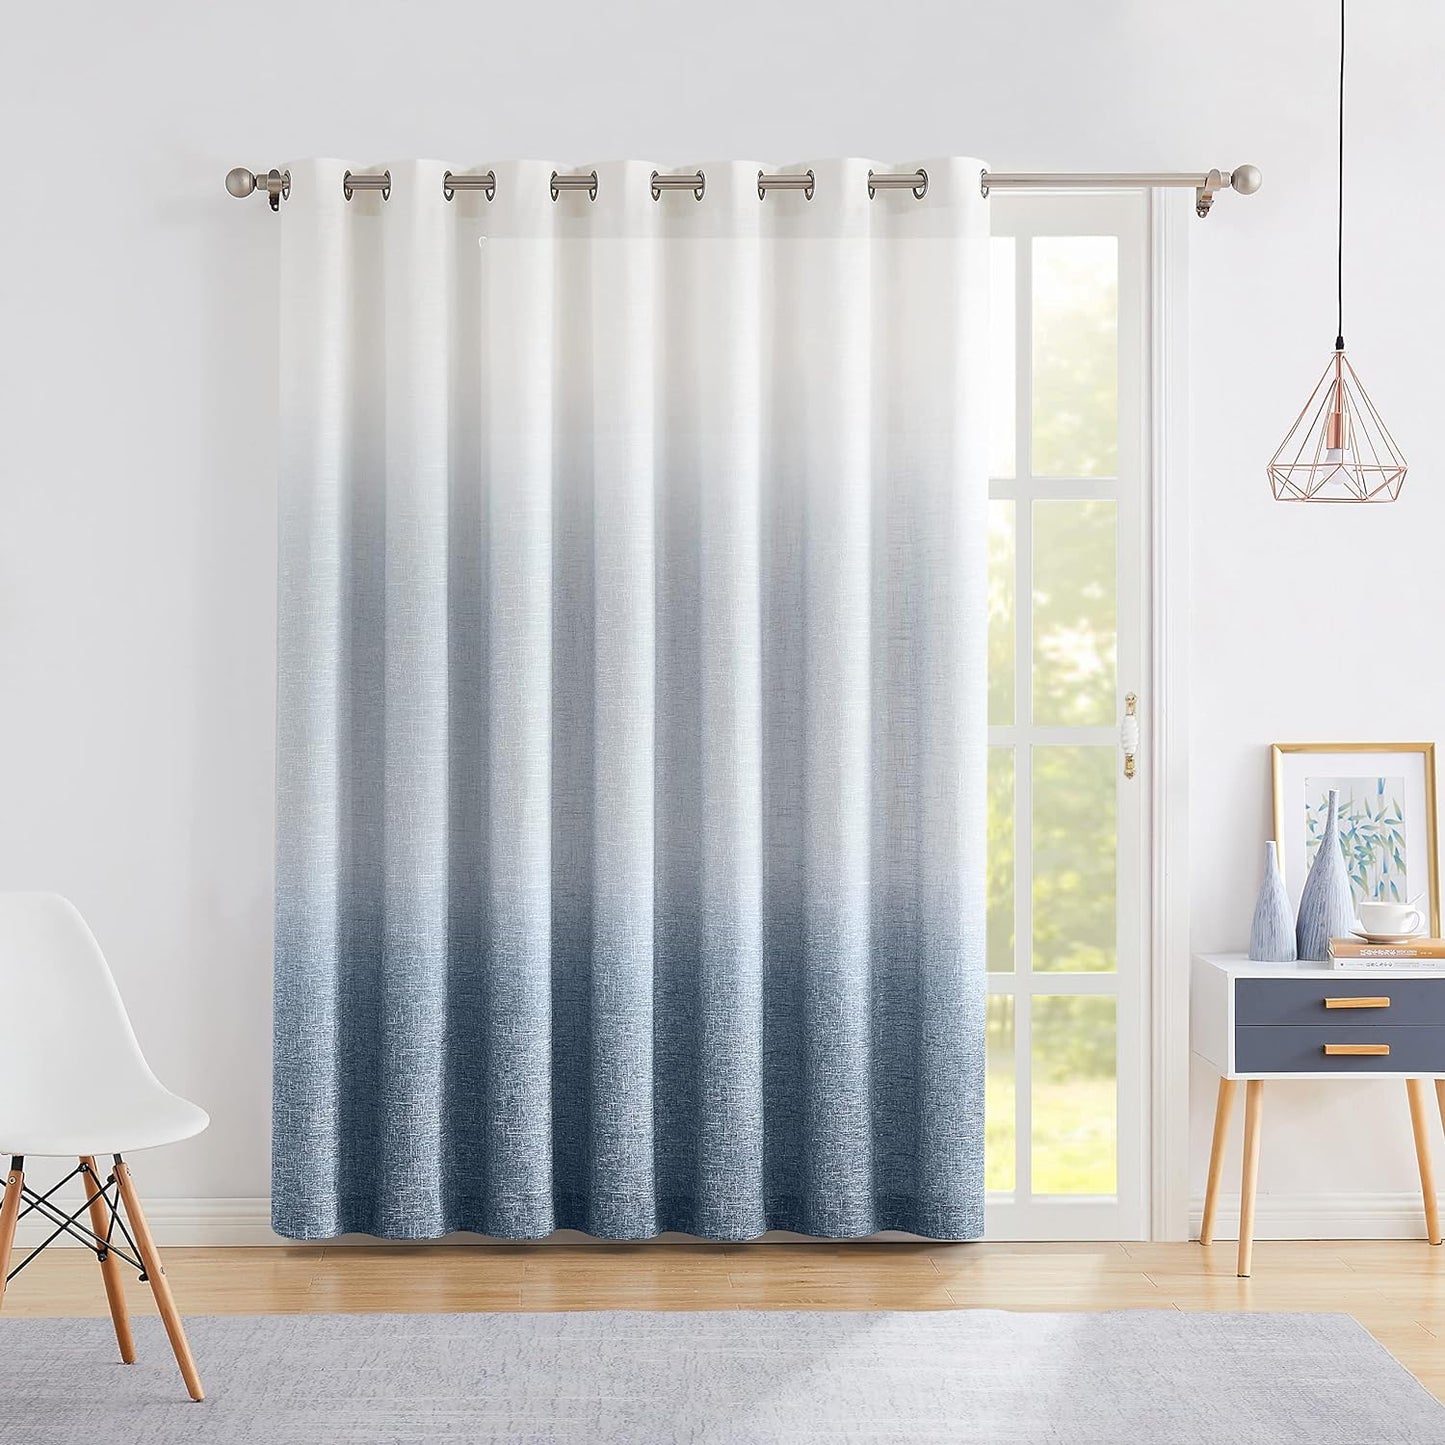 Ombre Window Door Curtain 100" Extra Wide Linen Ombre Gradient Print on Rayon Blend Fabric Treatment for Sliding Patio Door with 14 Grommets, Cream White to Light Gray, 100" X 84", 1 Panel  Central Park Indigo Blue 100" X 95" (1 Panel) 